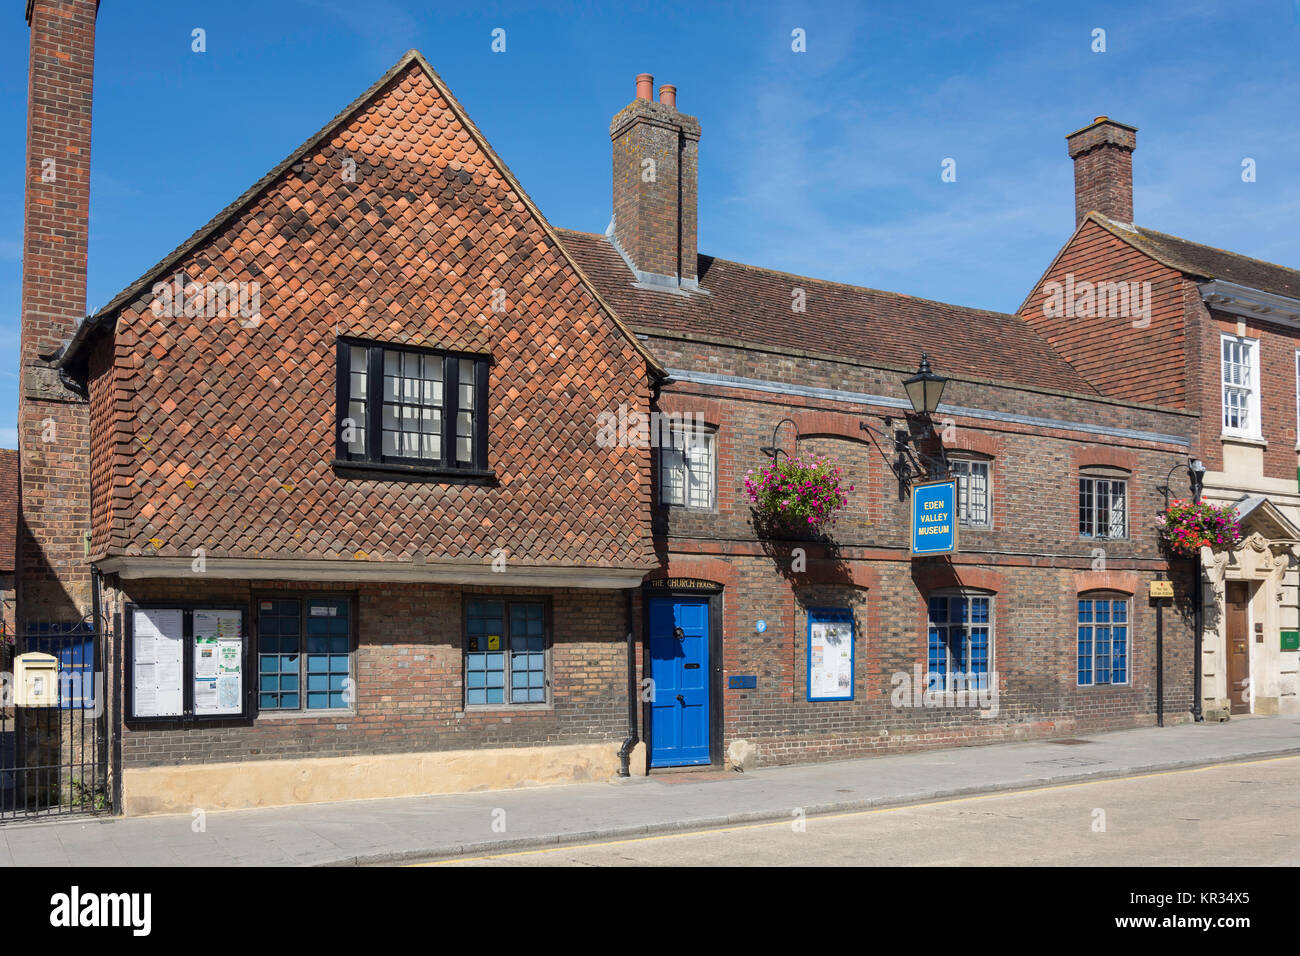 Eden Valley Museum, High Street, Canterbury, Kent, England, United Kingdom Banque D'Images